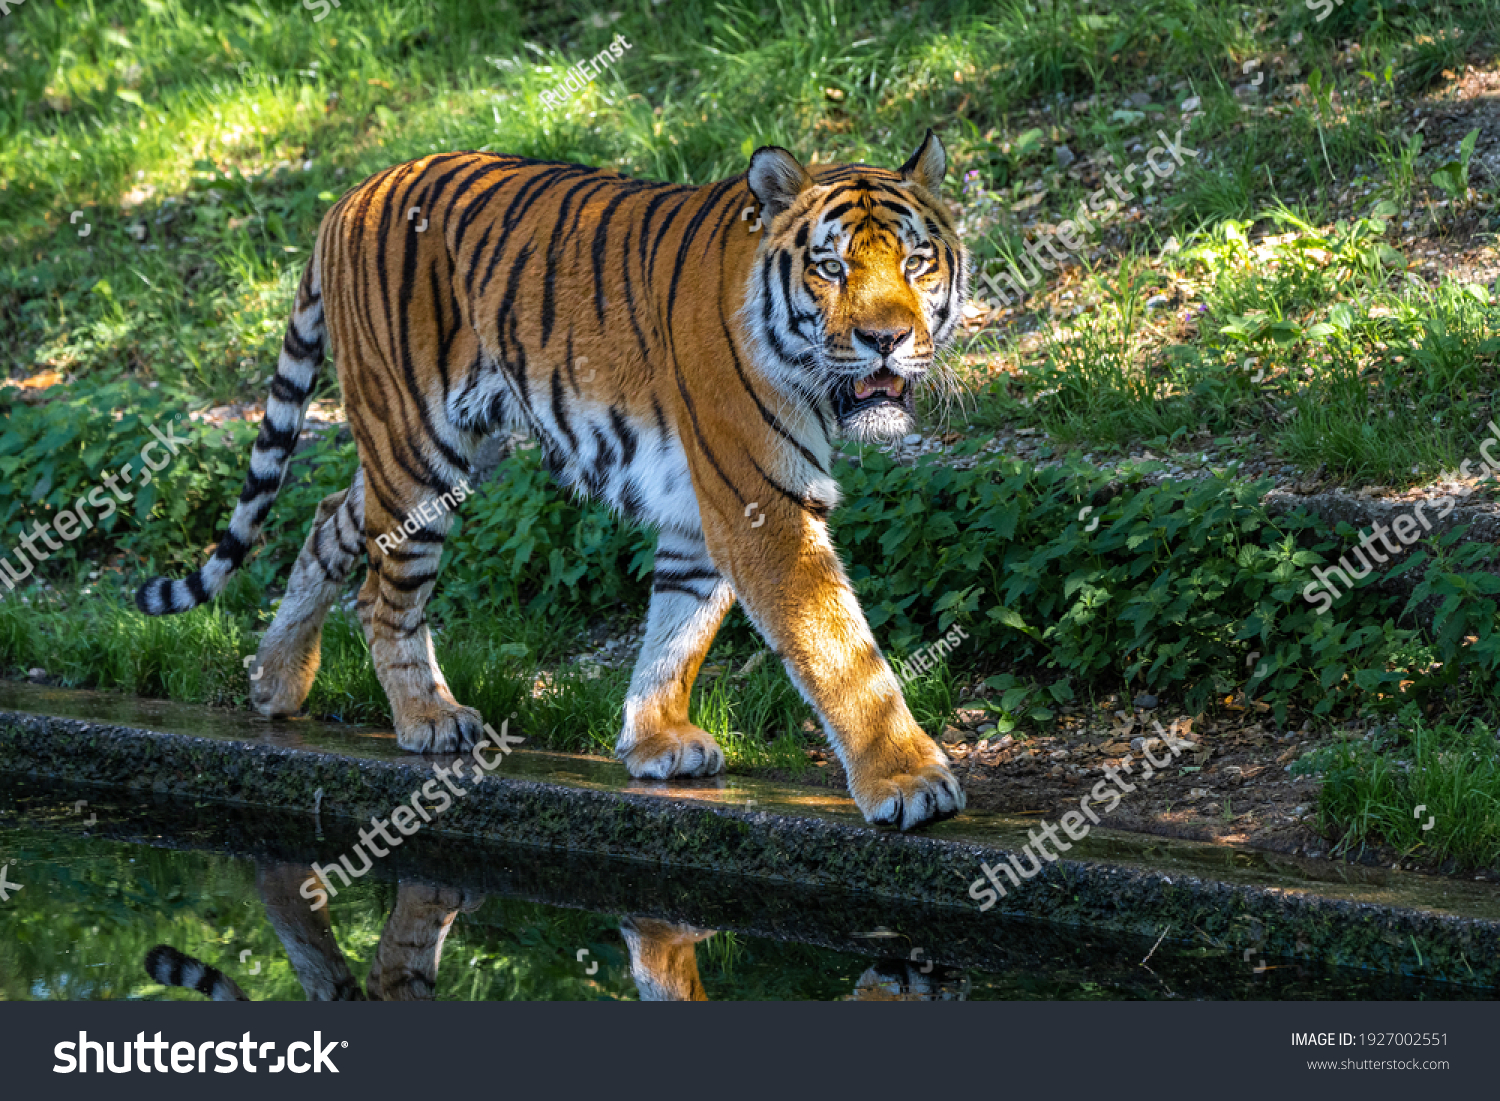 The Siberian tiger,Panthera tigris altaica is the biggest cat in the world #1927002551